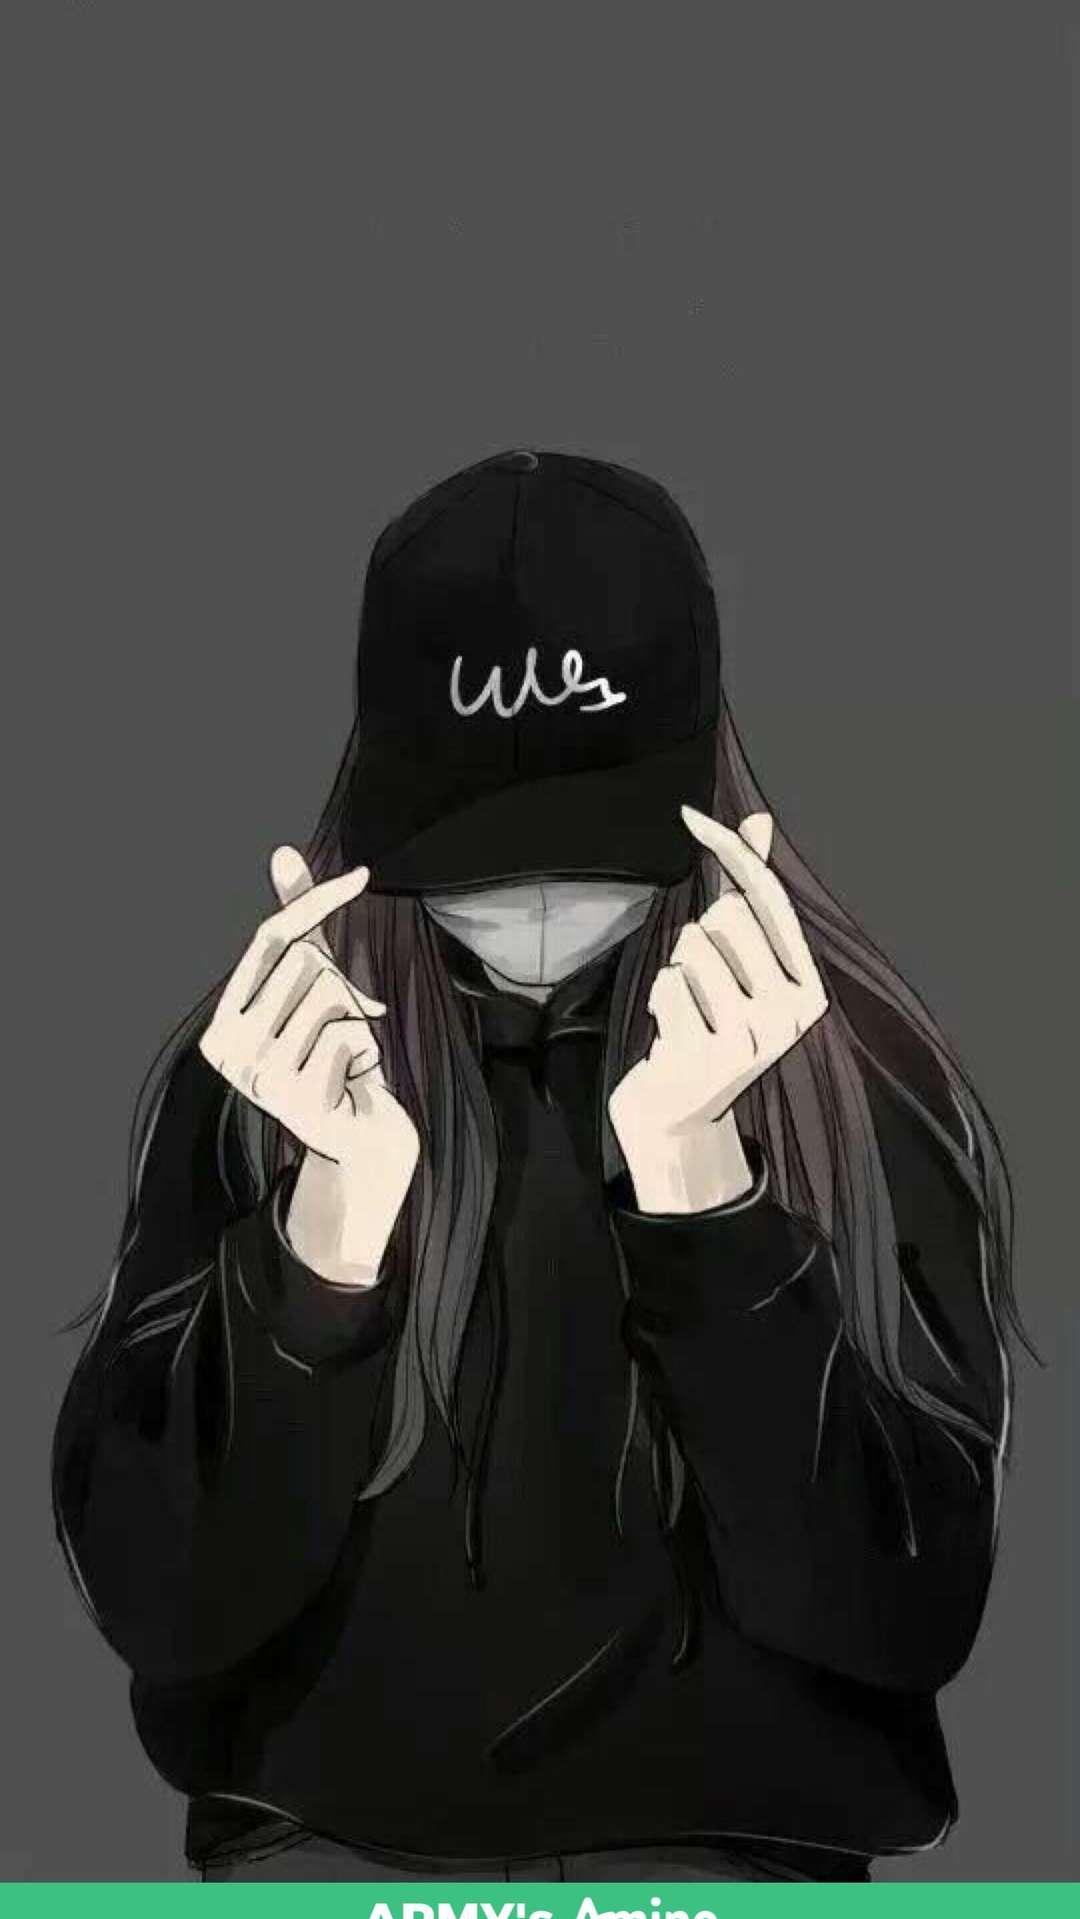 Hoodie Anime Girl Wallpaper For iPhone And Android By William